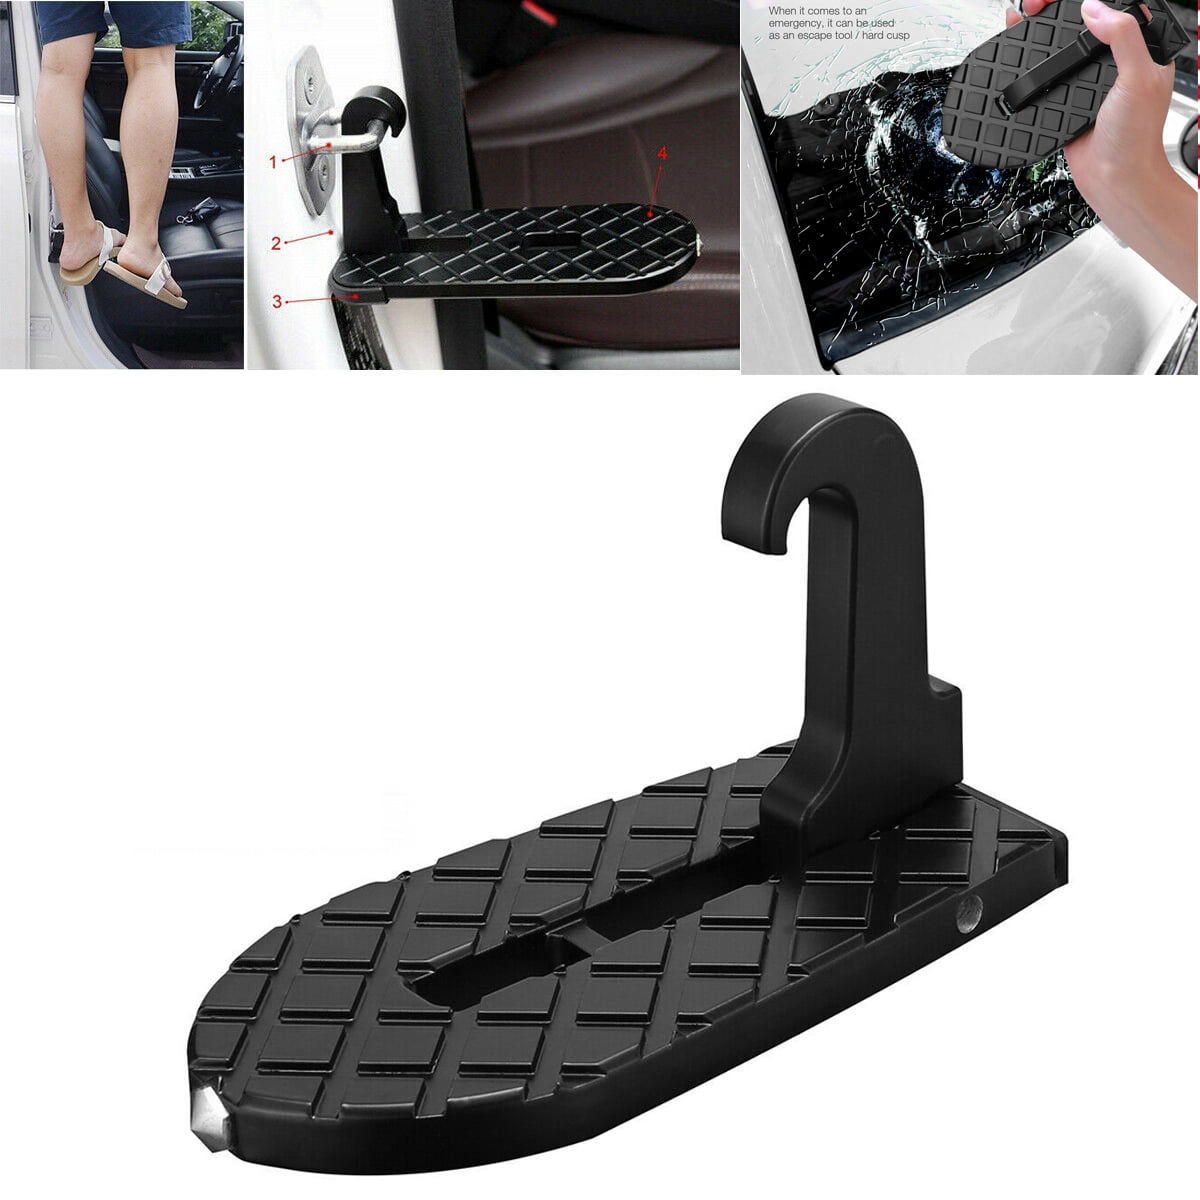 1pcs Multi functional Folding Car Latch Hook Door Step Mini Foot Pedal Ladder for Assisting in boarding the roof 